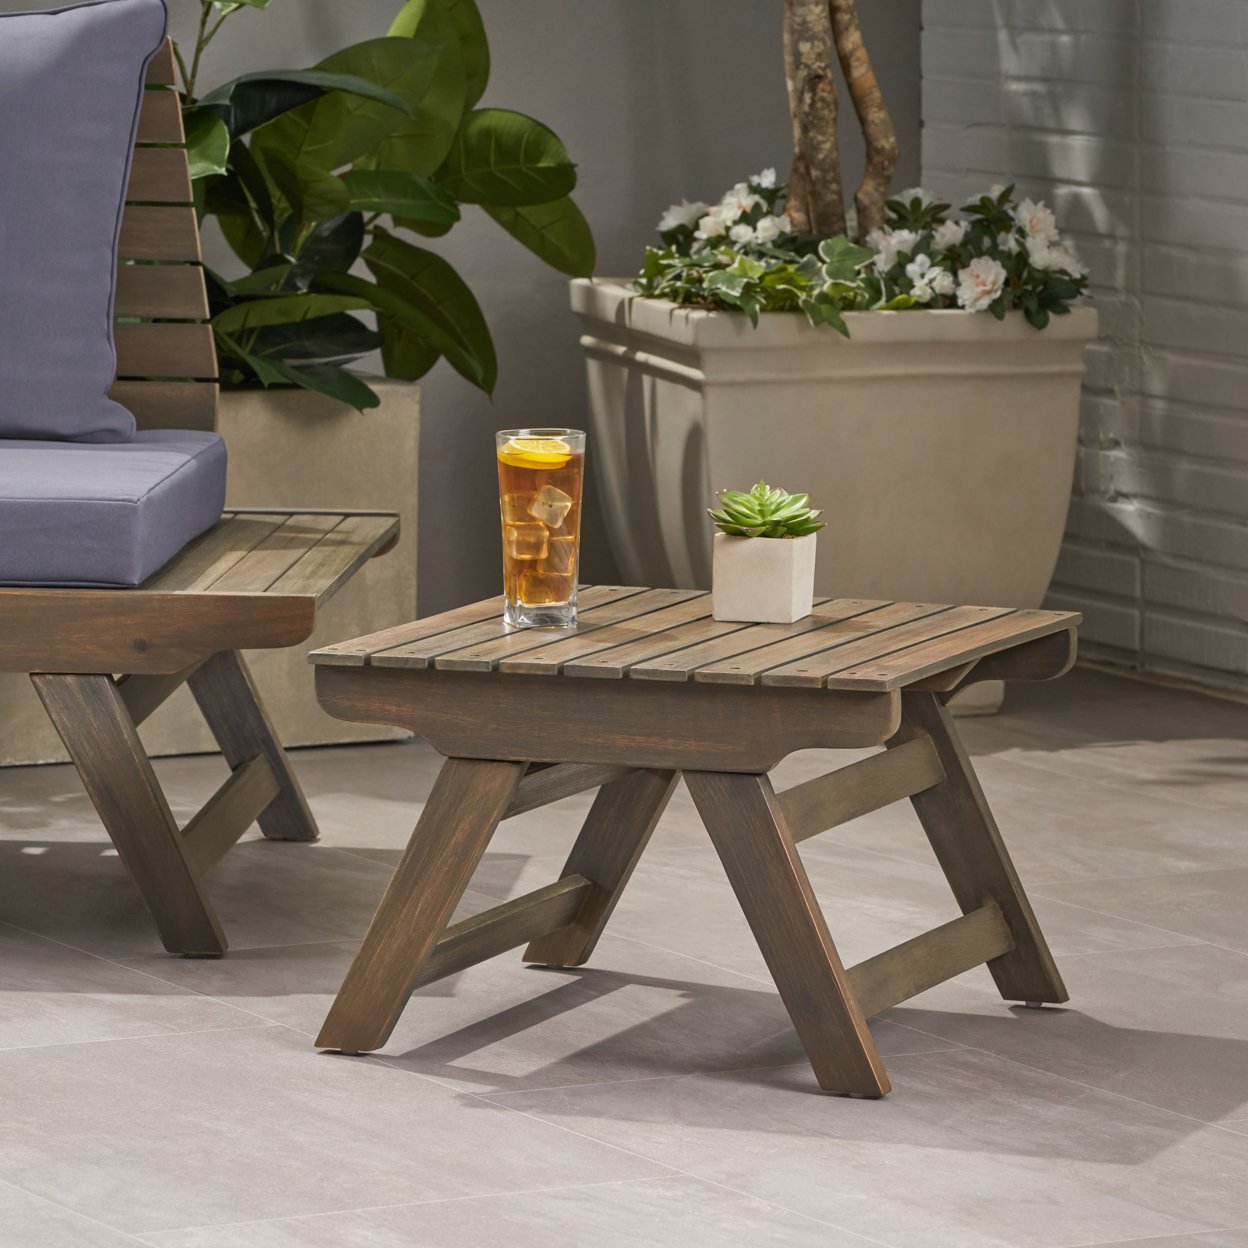 Kailee Outdoor Wooden Side Table - Gray Finish